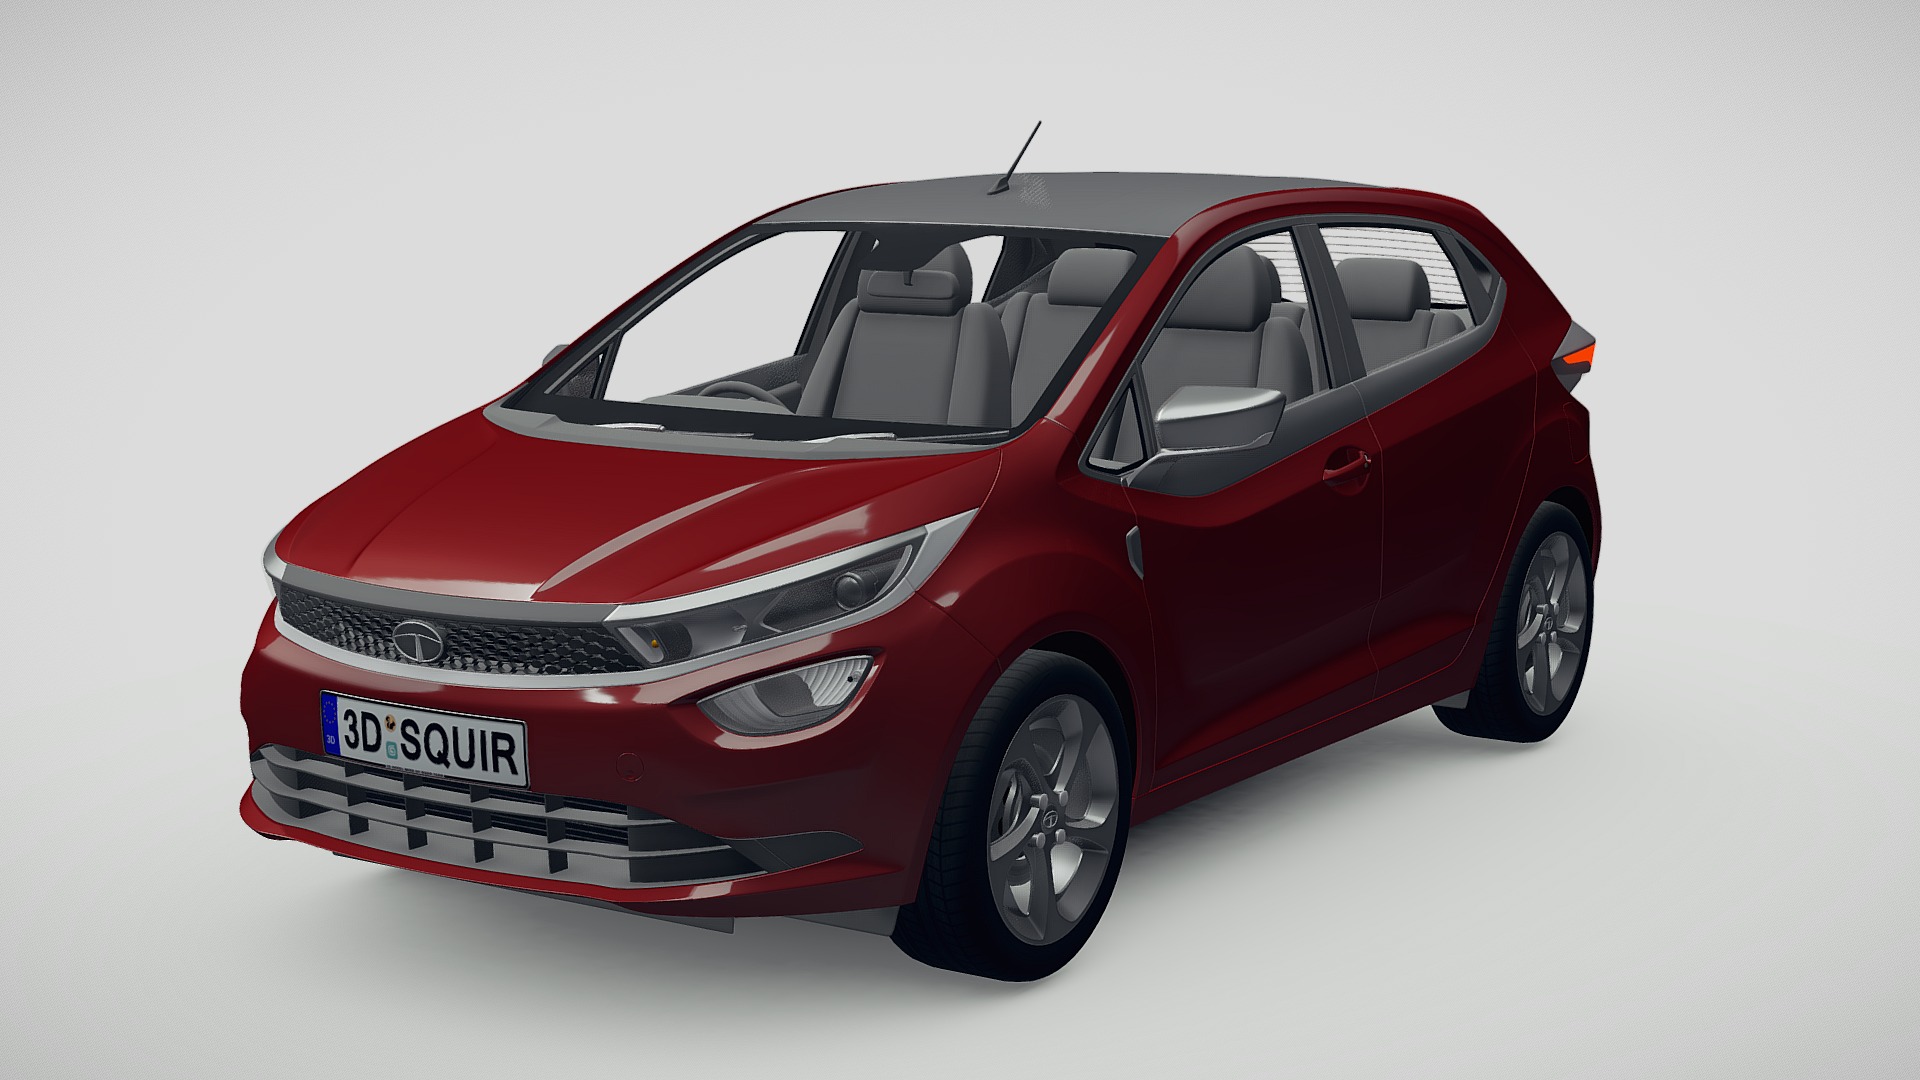 3D model TATA Altroz 2020 - This is a 3D model of the TATA Altroz 2020. The 3D model is about a red car with a white background.